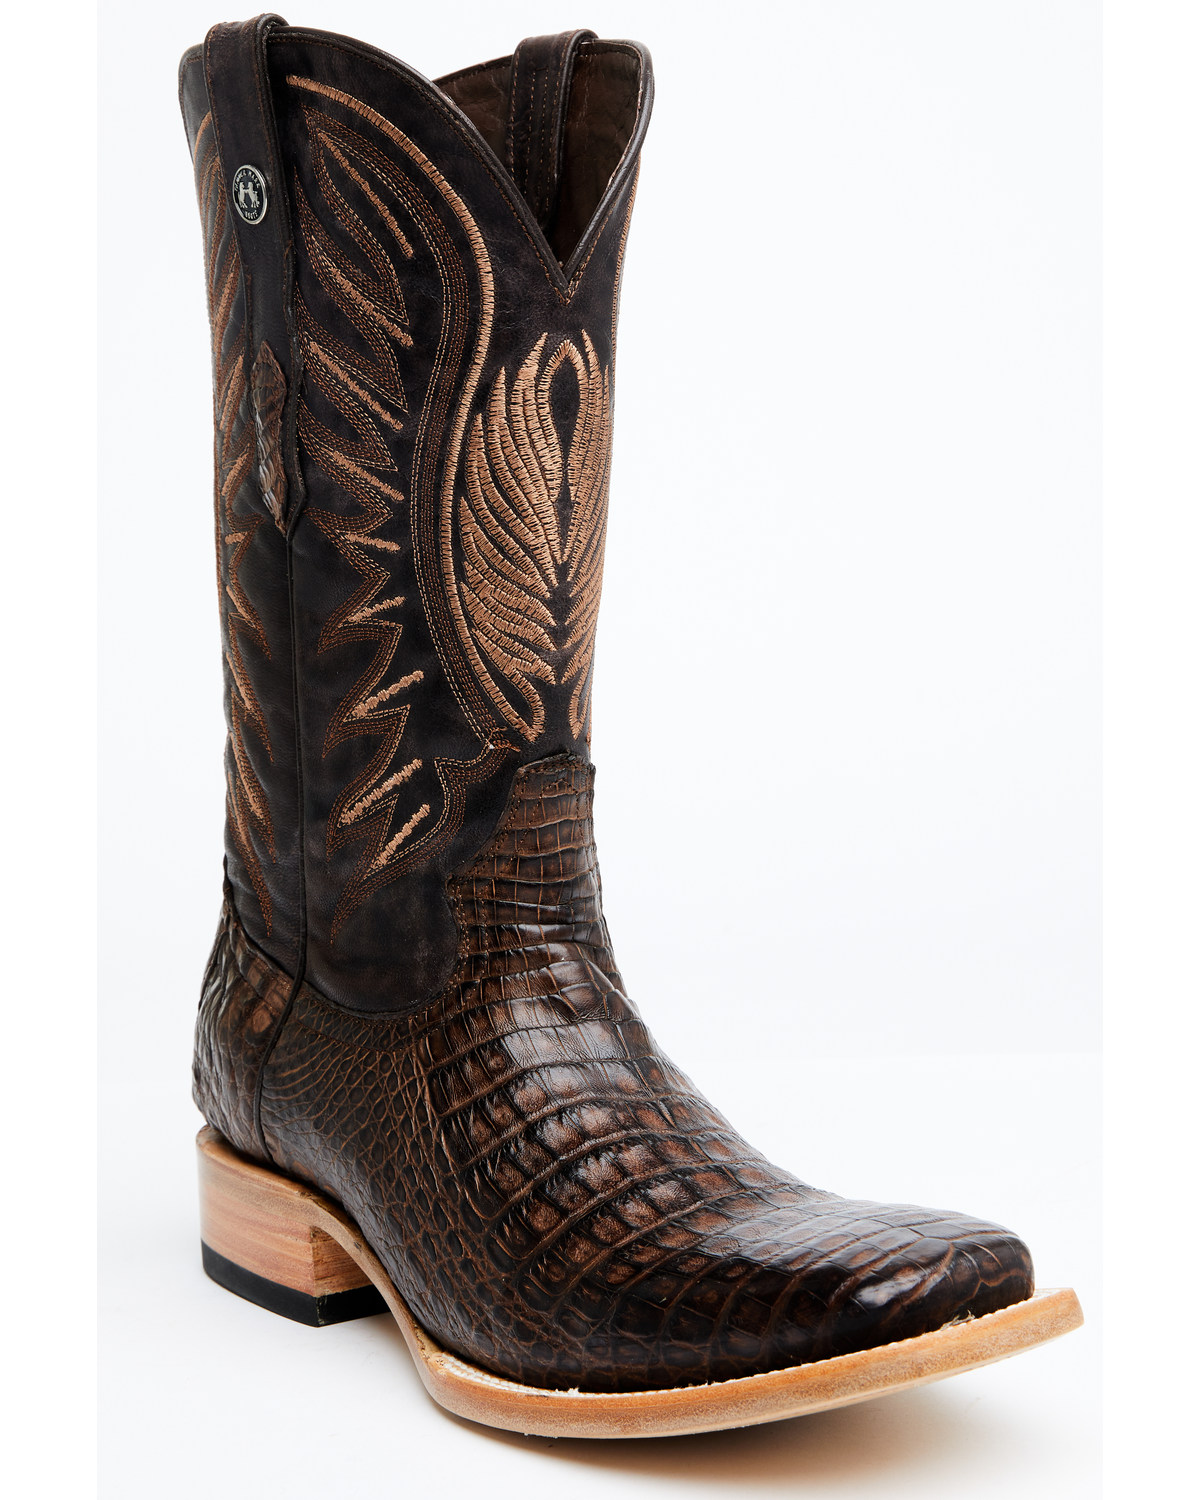 Tanner Mark Men's Shawnee Exotic Caiman Belly Western Boots - Broad Square Toe